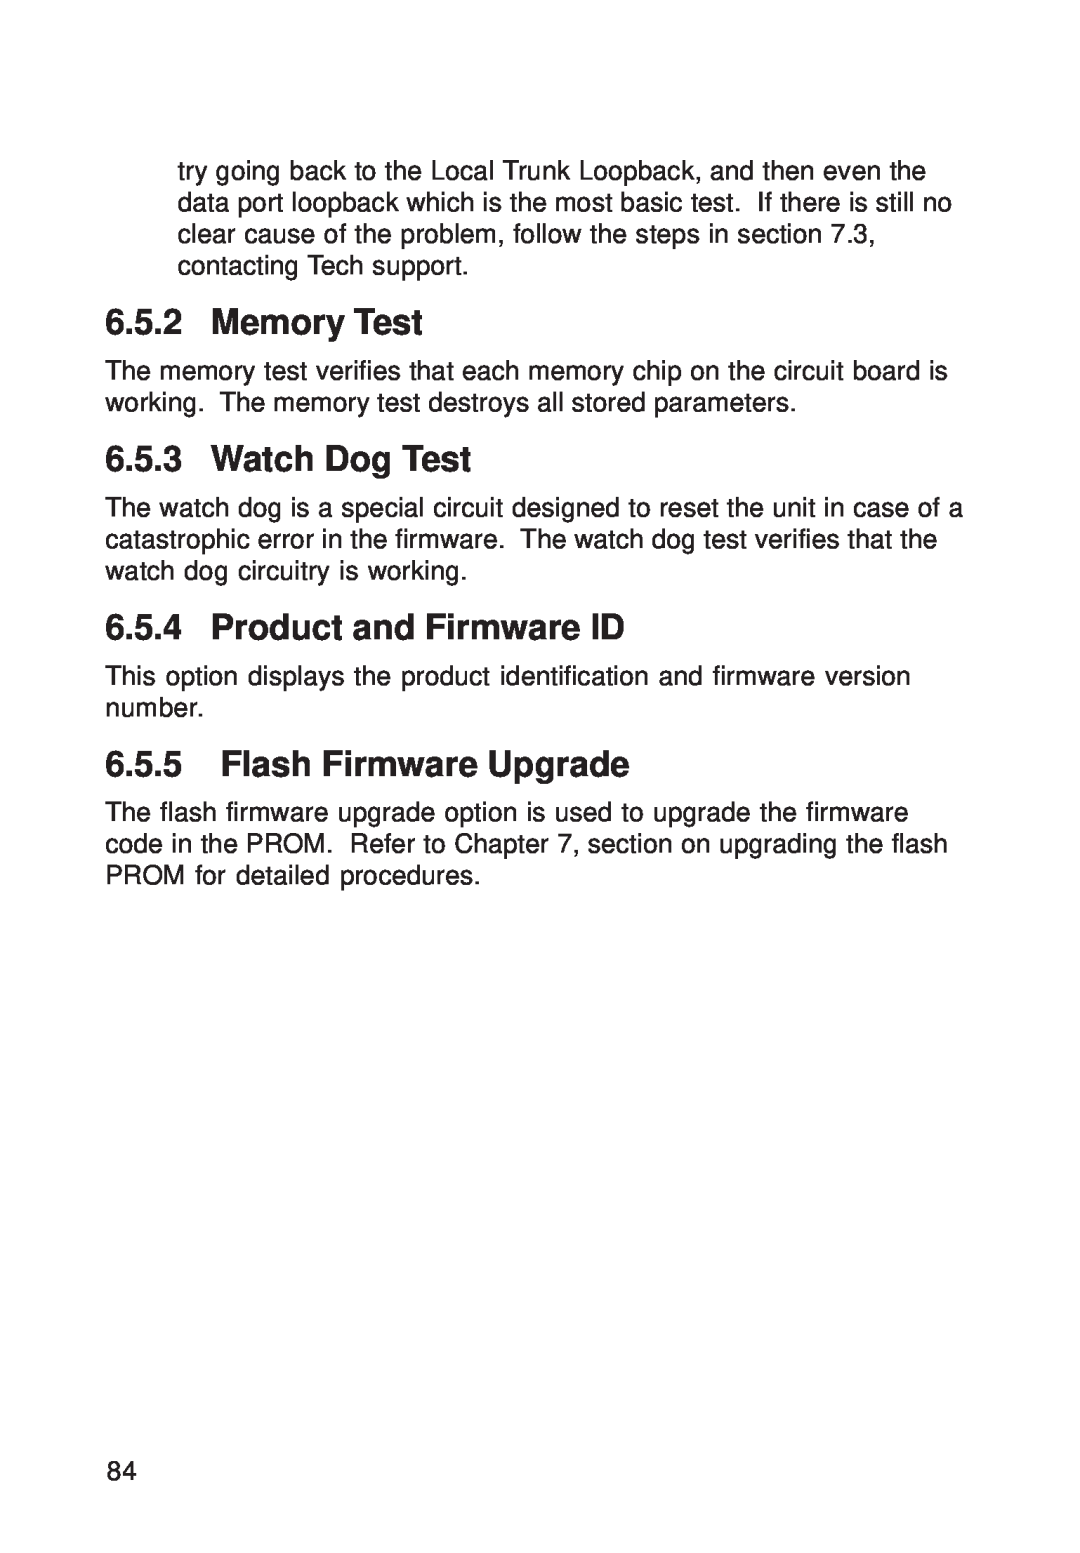 Multi-Tech Systems FR111 owner manual Memory Test, Watch Dog Test, Product and Firmware ID, Flash Firmware Upgrade 